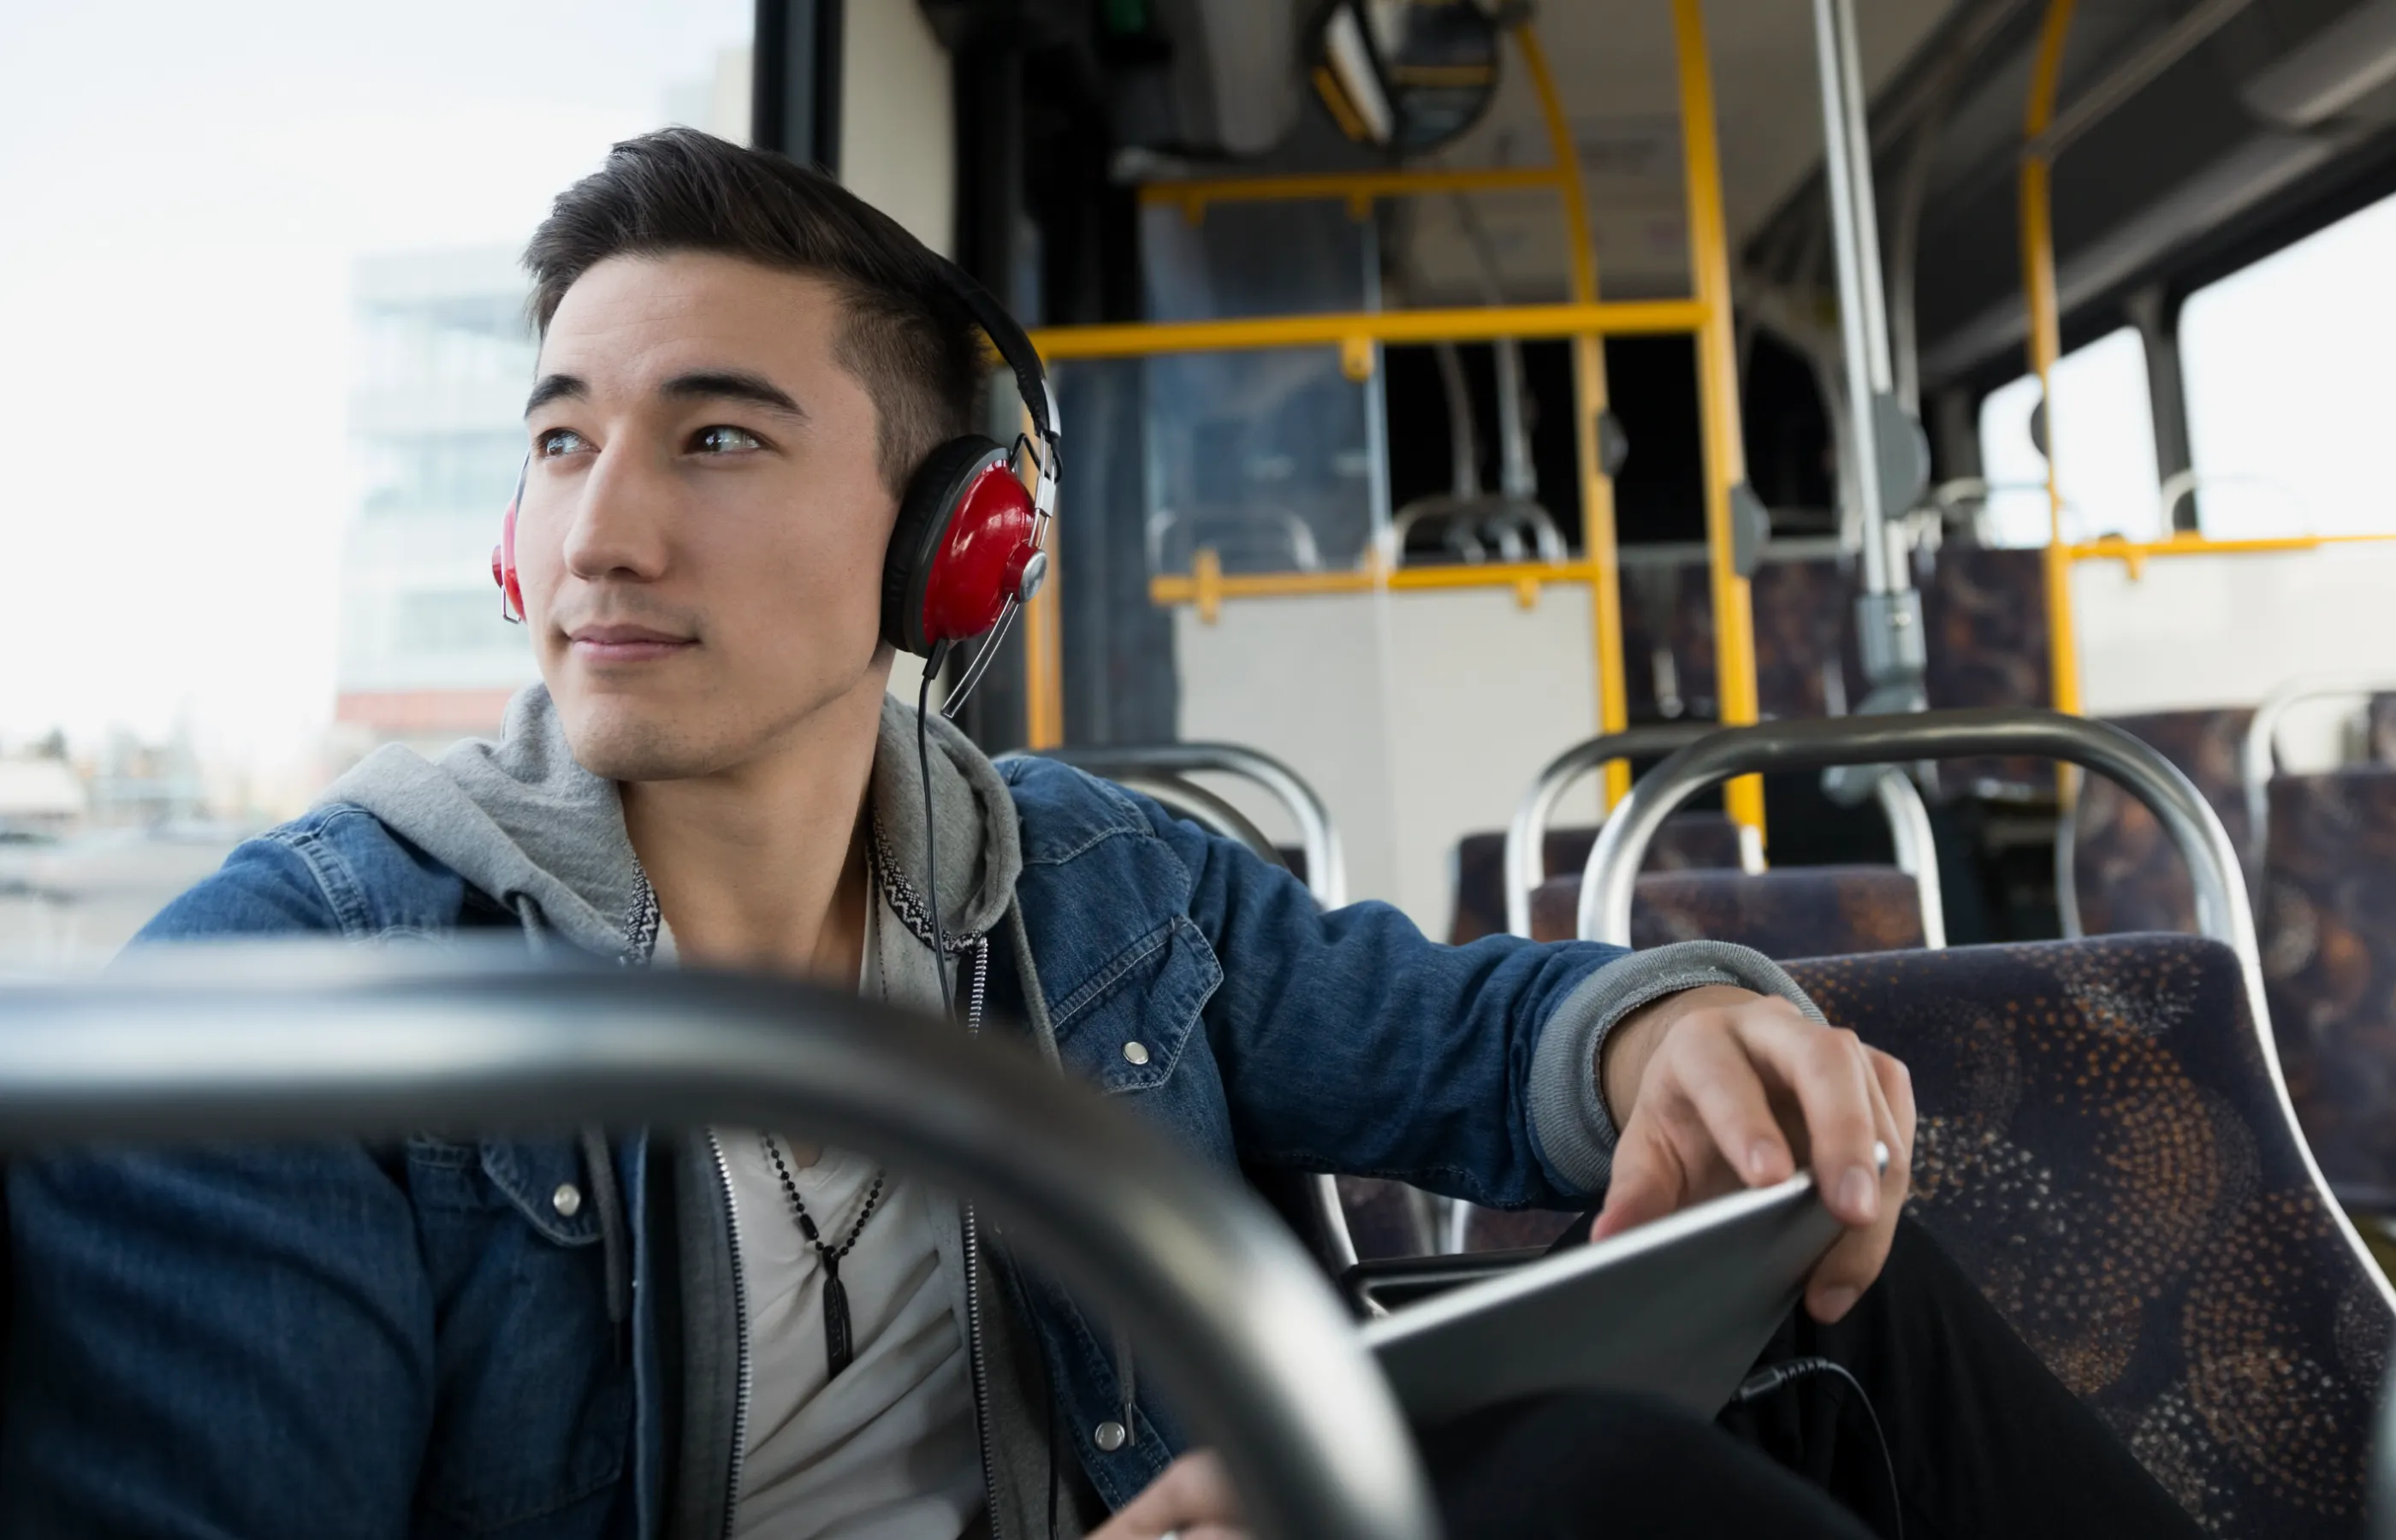 Young man sitting on a public bus with headphones on a tablet in hand. 